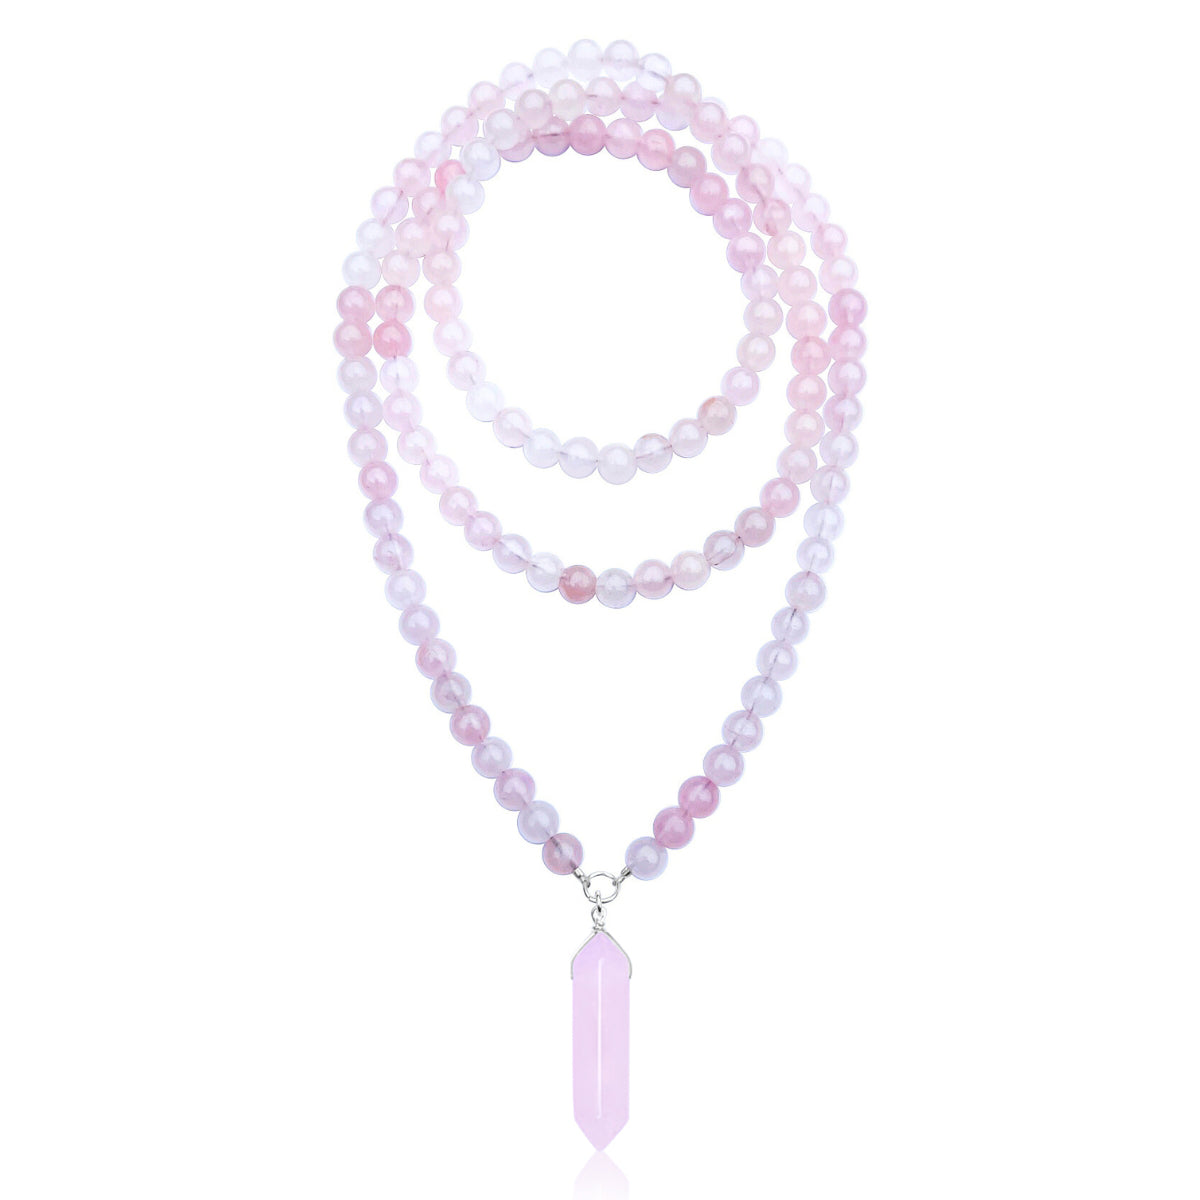 The Gentle Heart Rose Quartz Necklace is made of healing crystals that are known as the stone of love. It is believed that Rose Quartz enhances feelings of compassion, tenderness, and love towards oneself and others.